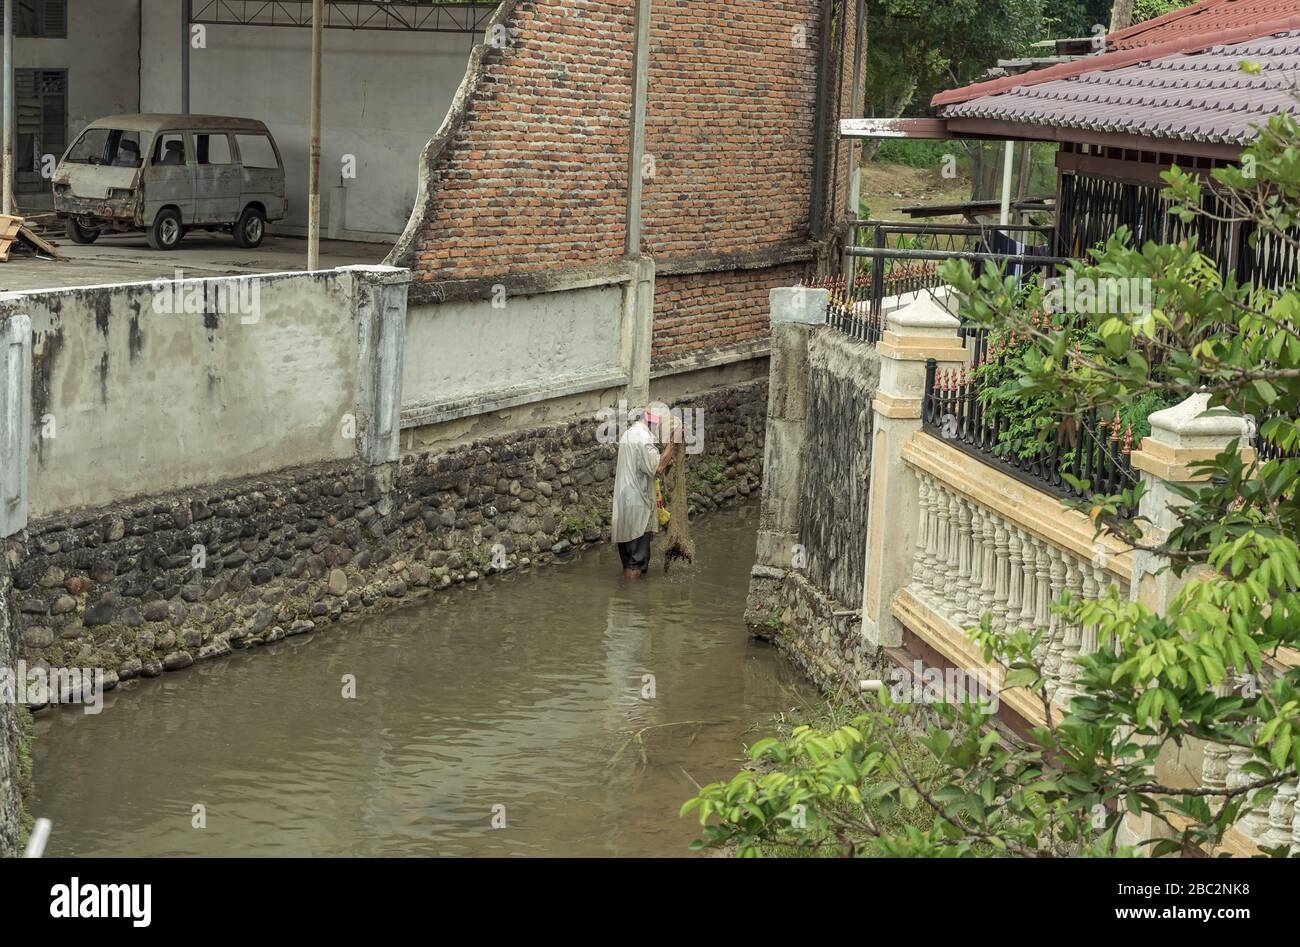 21 June 2018 Panyambungan,Sumatra, Indonesia: Local poor man fishing with net in murky dirty river in middle of town also old dirty shabby car visible Stock Photo